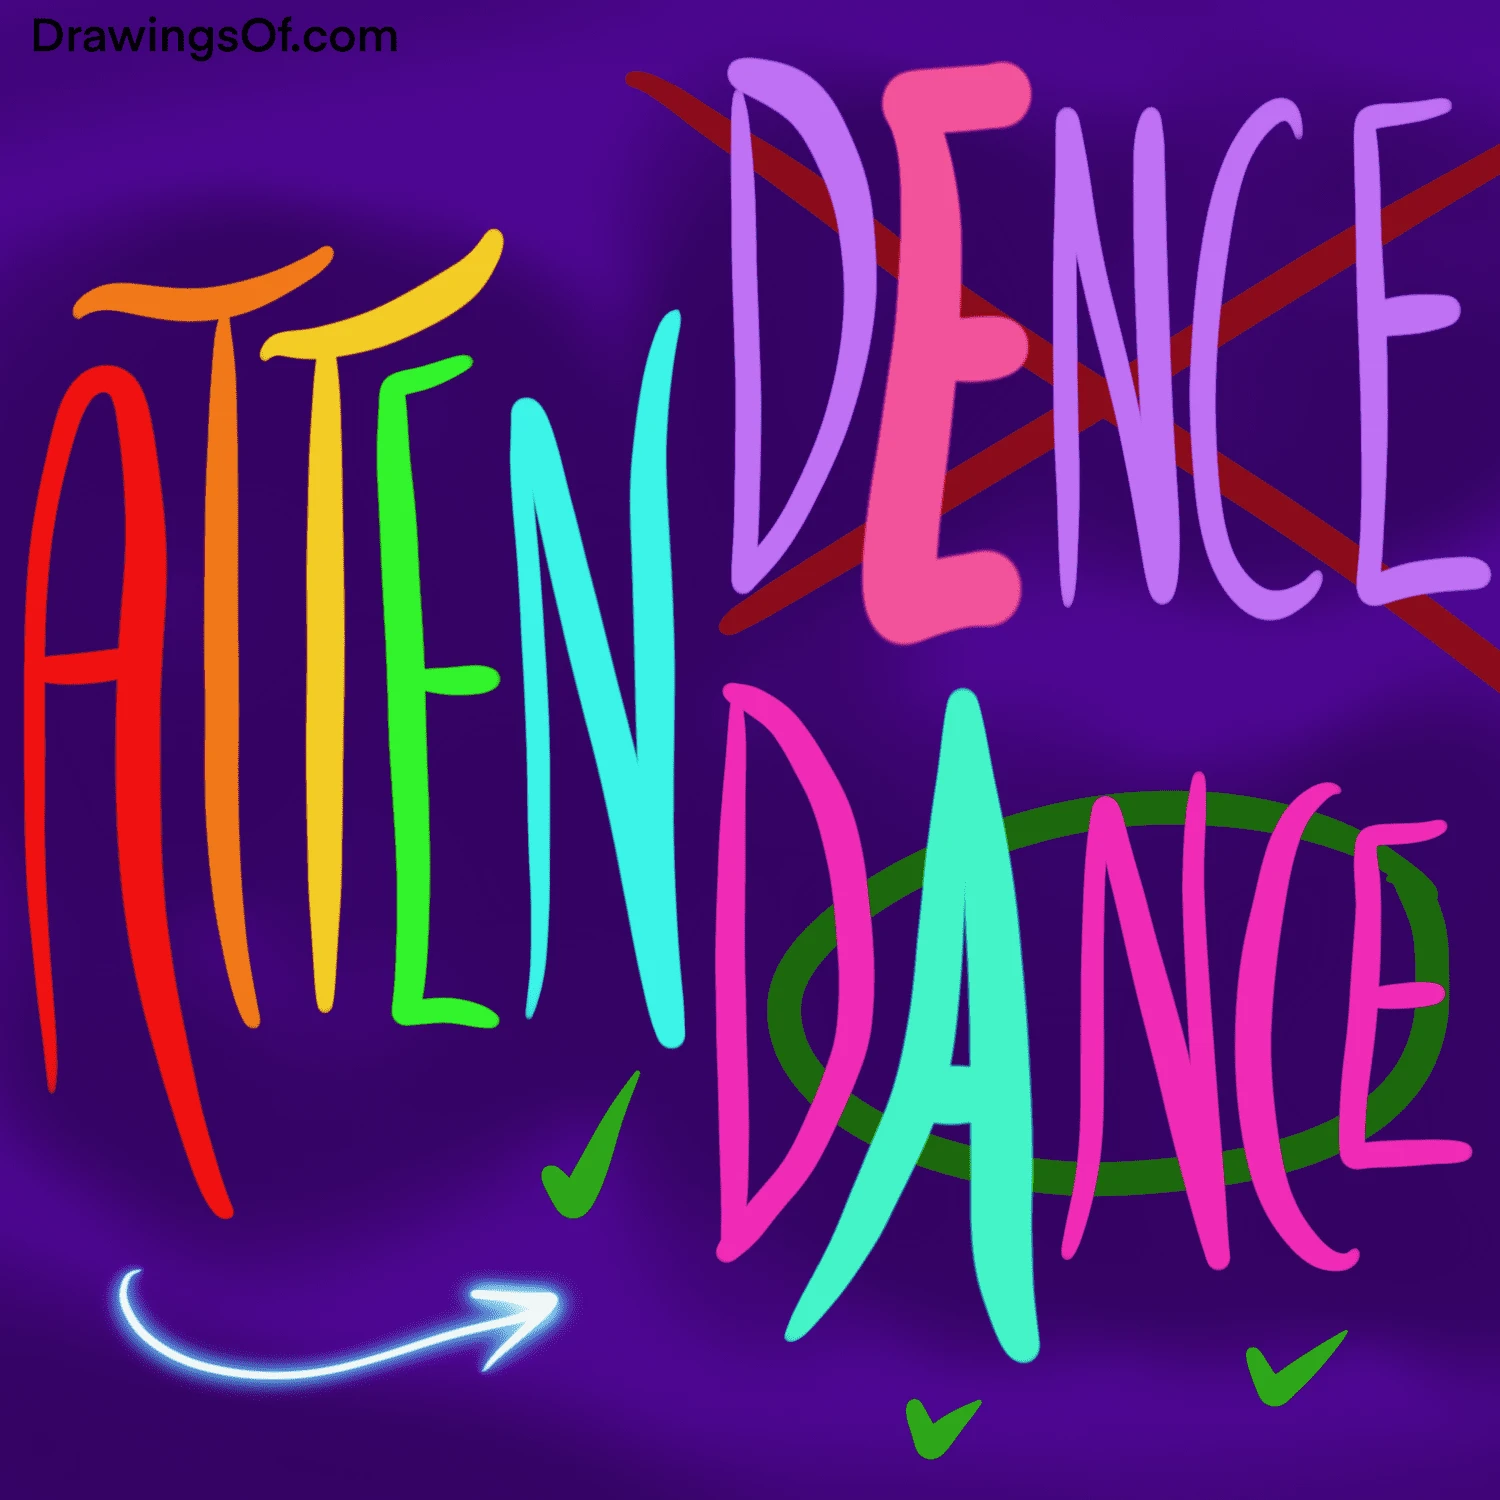 Attendance or attendence?